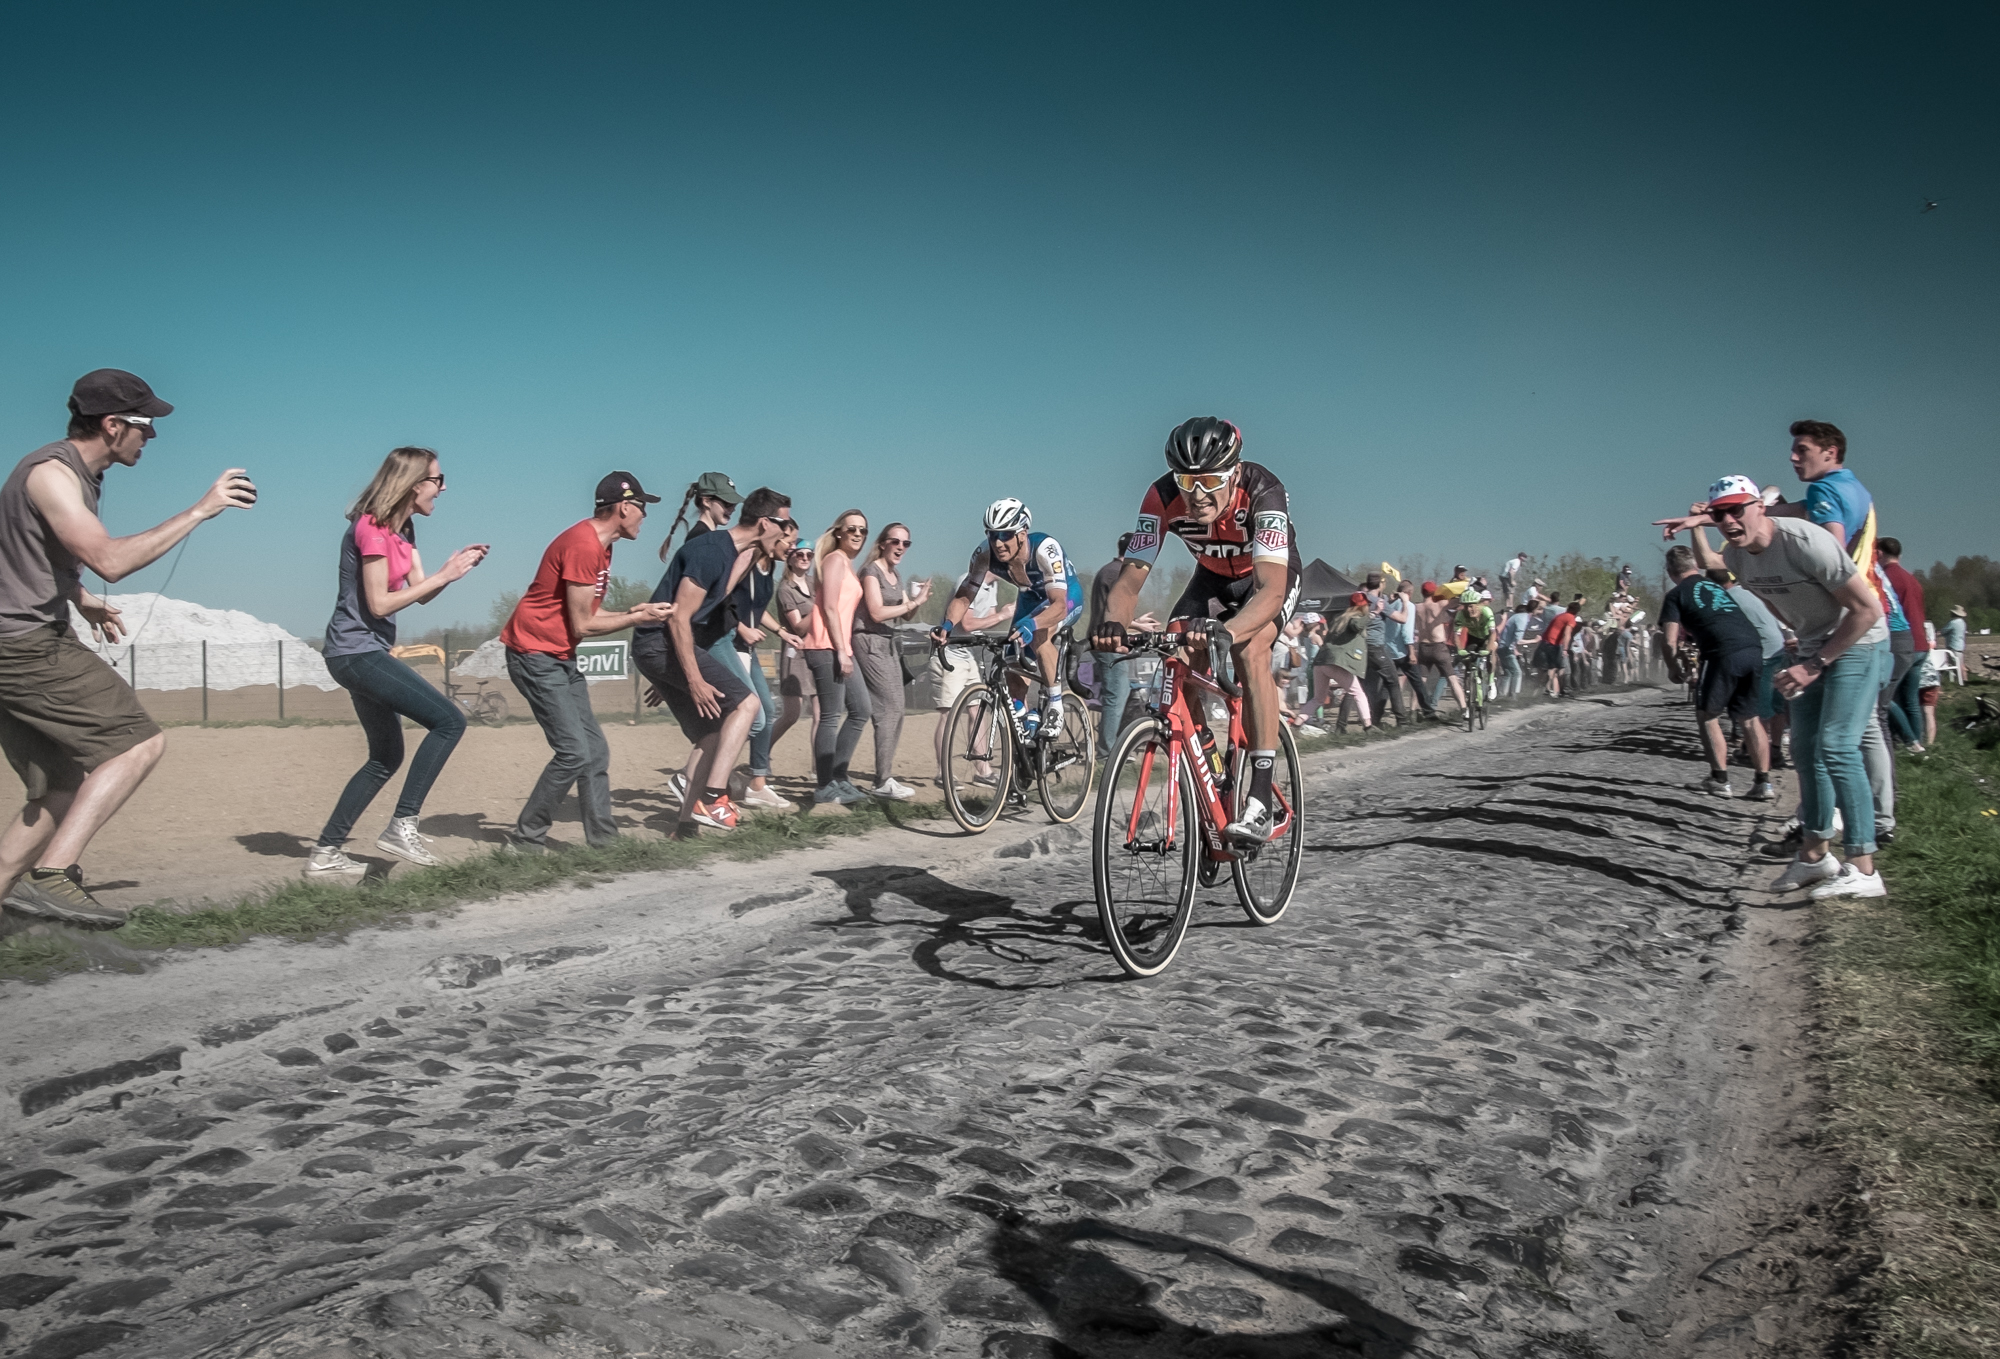 As a spectator at Paris-Roubaix 2017 – WhyWeCycle